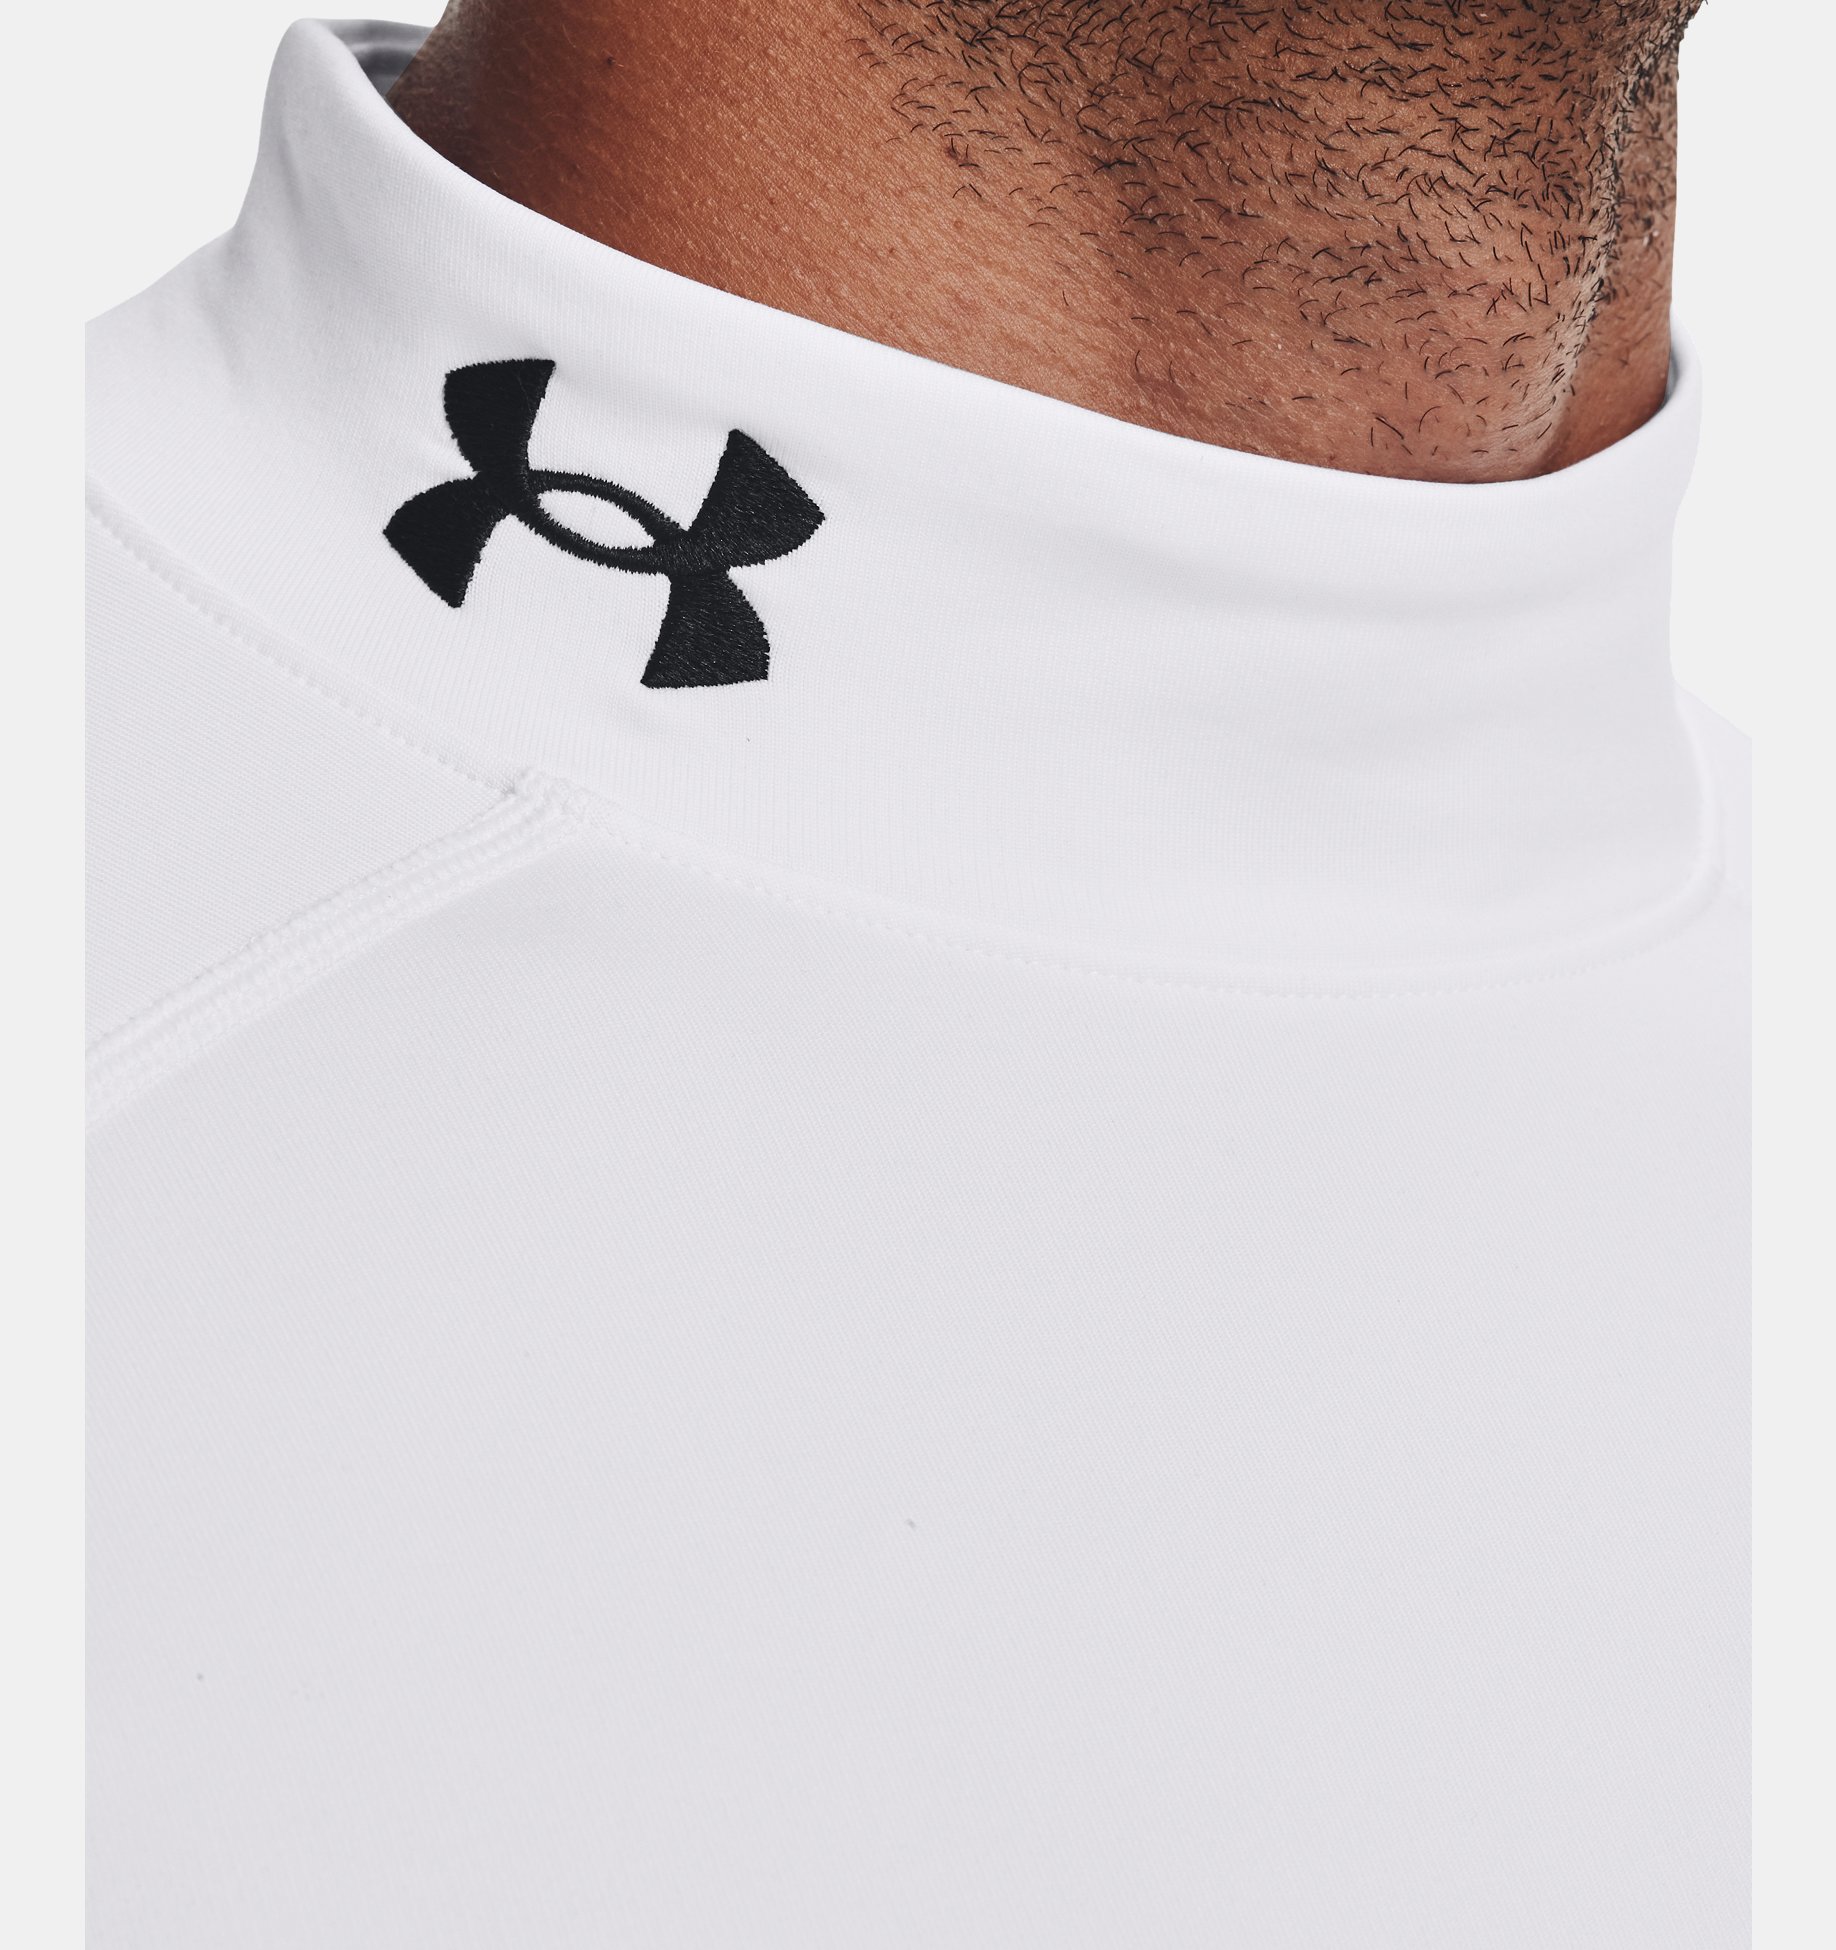 Behavior Smooth Disgraceful Men's ColdGear® Fitted Mock | Under Armour